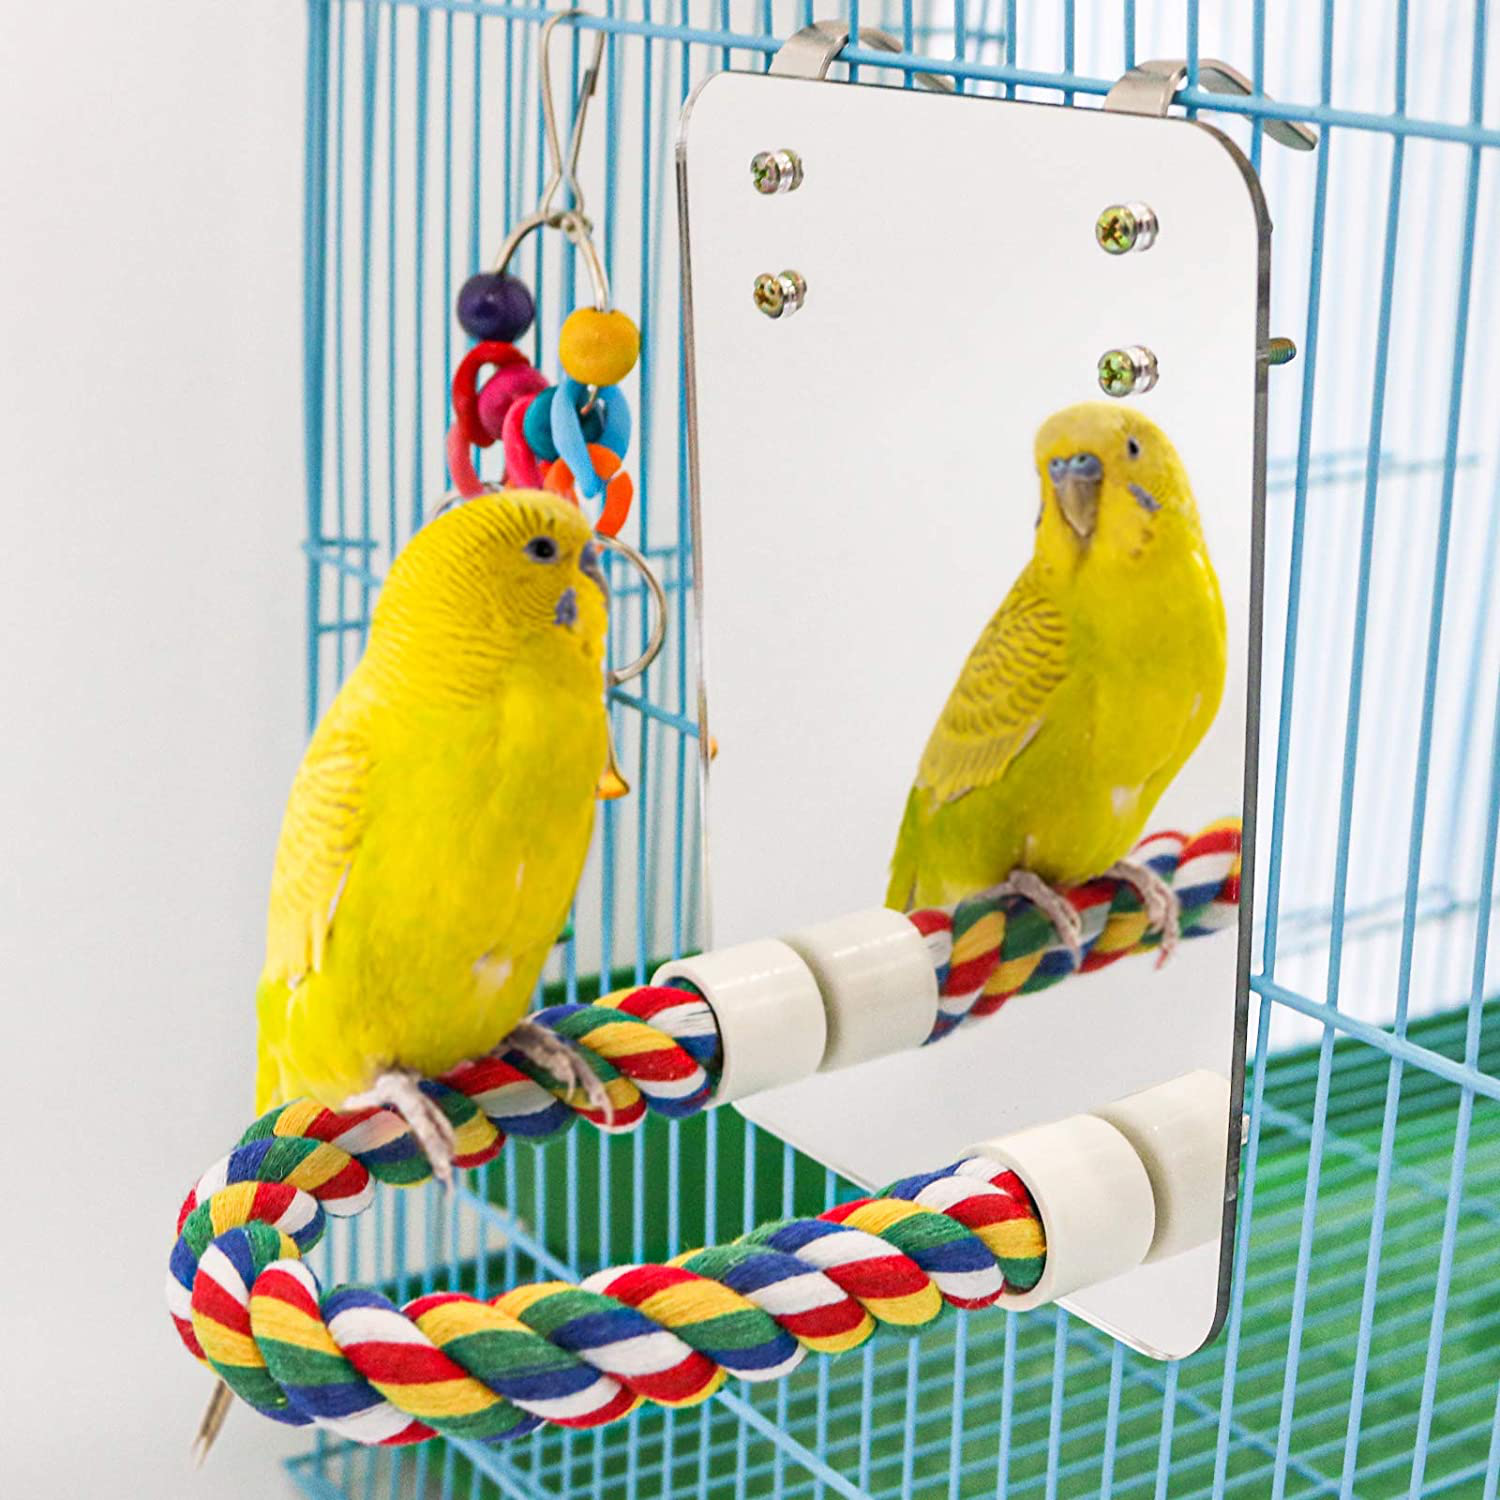 Suruikei 7 Inch Bird Mirror with Rope Perch Cockatiel Mirror Parrot Swing Toys Parrot Cage Toys for Parakeet Cockatoo Cockatiel Conure Lovebirds Finch Canaries